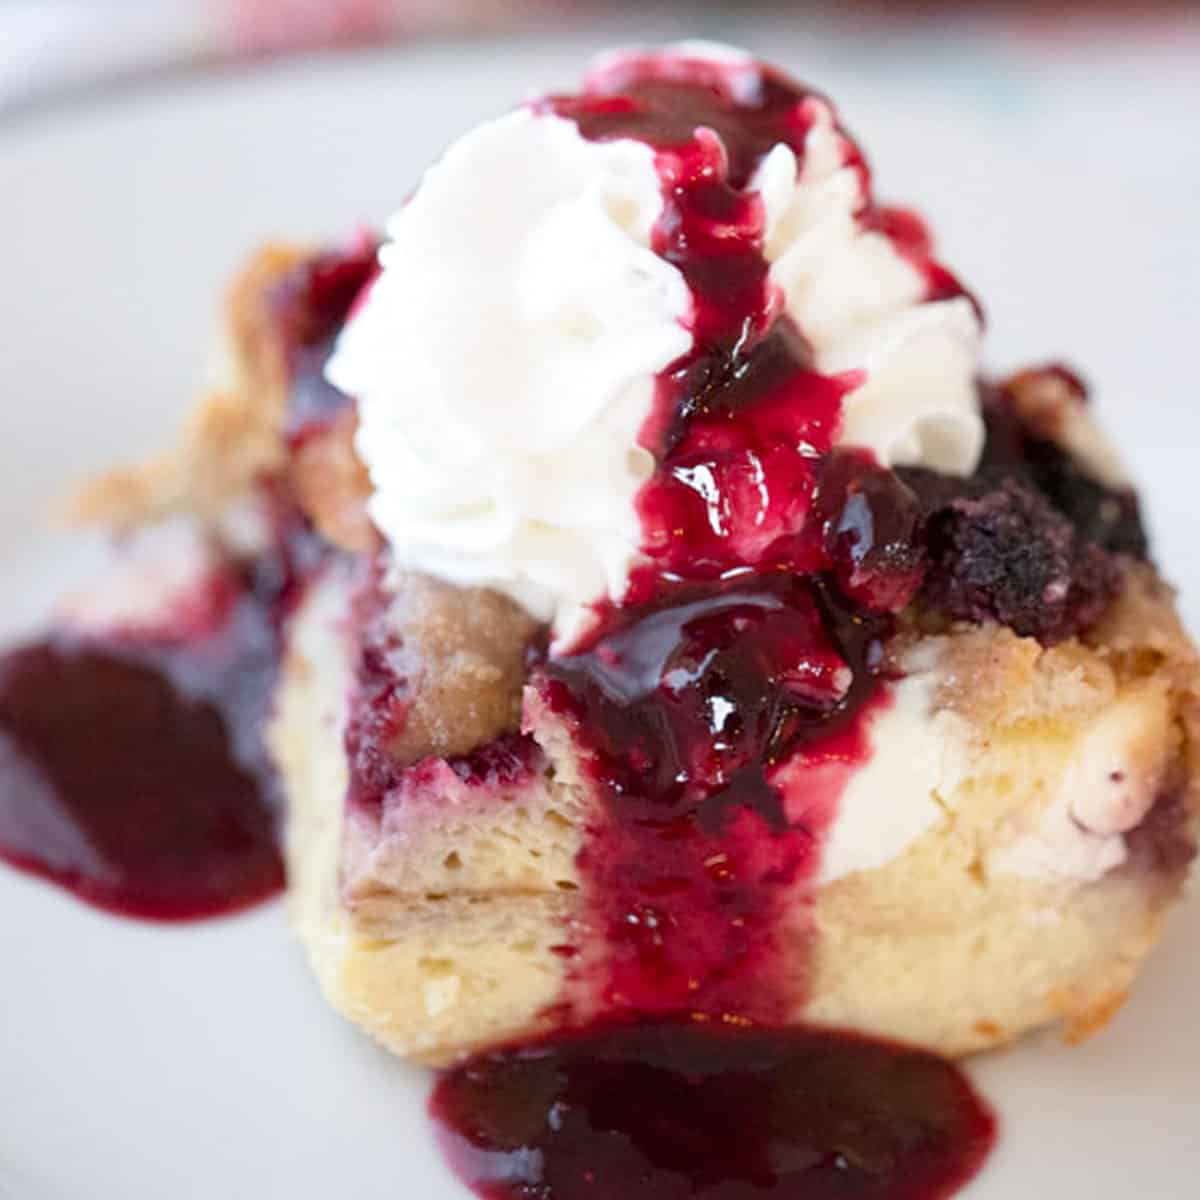 easy mixed berry overnight French toast bake.  It’s made with simple ingredients, frozen mixed berries, milk, cream cheese, and eggs.  It’s a delicious overnight French toast casserole with streusel topping.